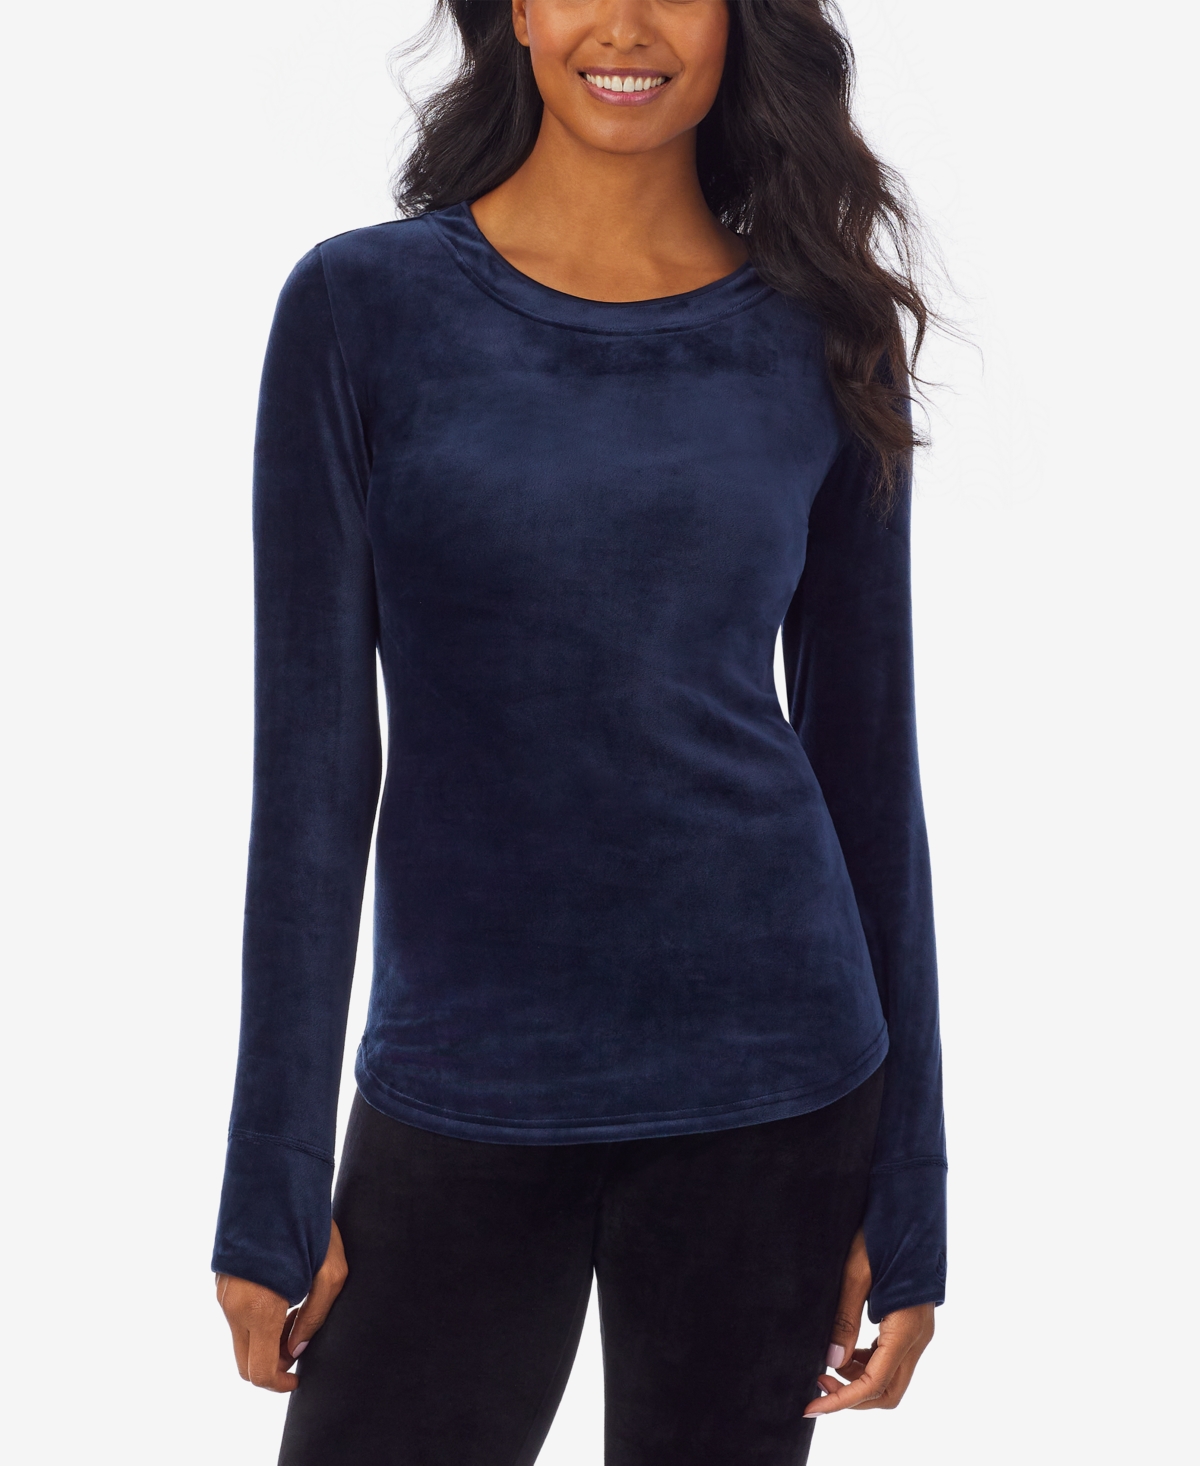 Cuddl Duds Womens Double Plush Velour Long Sleeve Top 